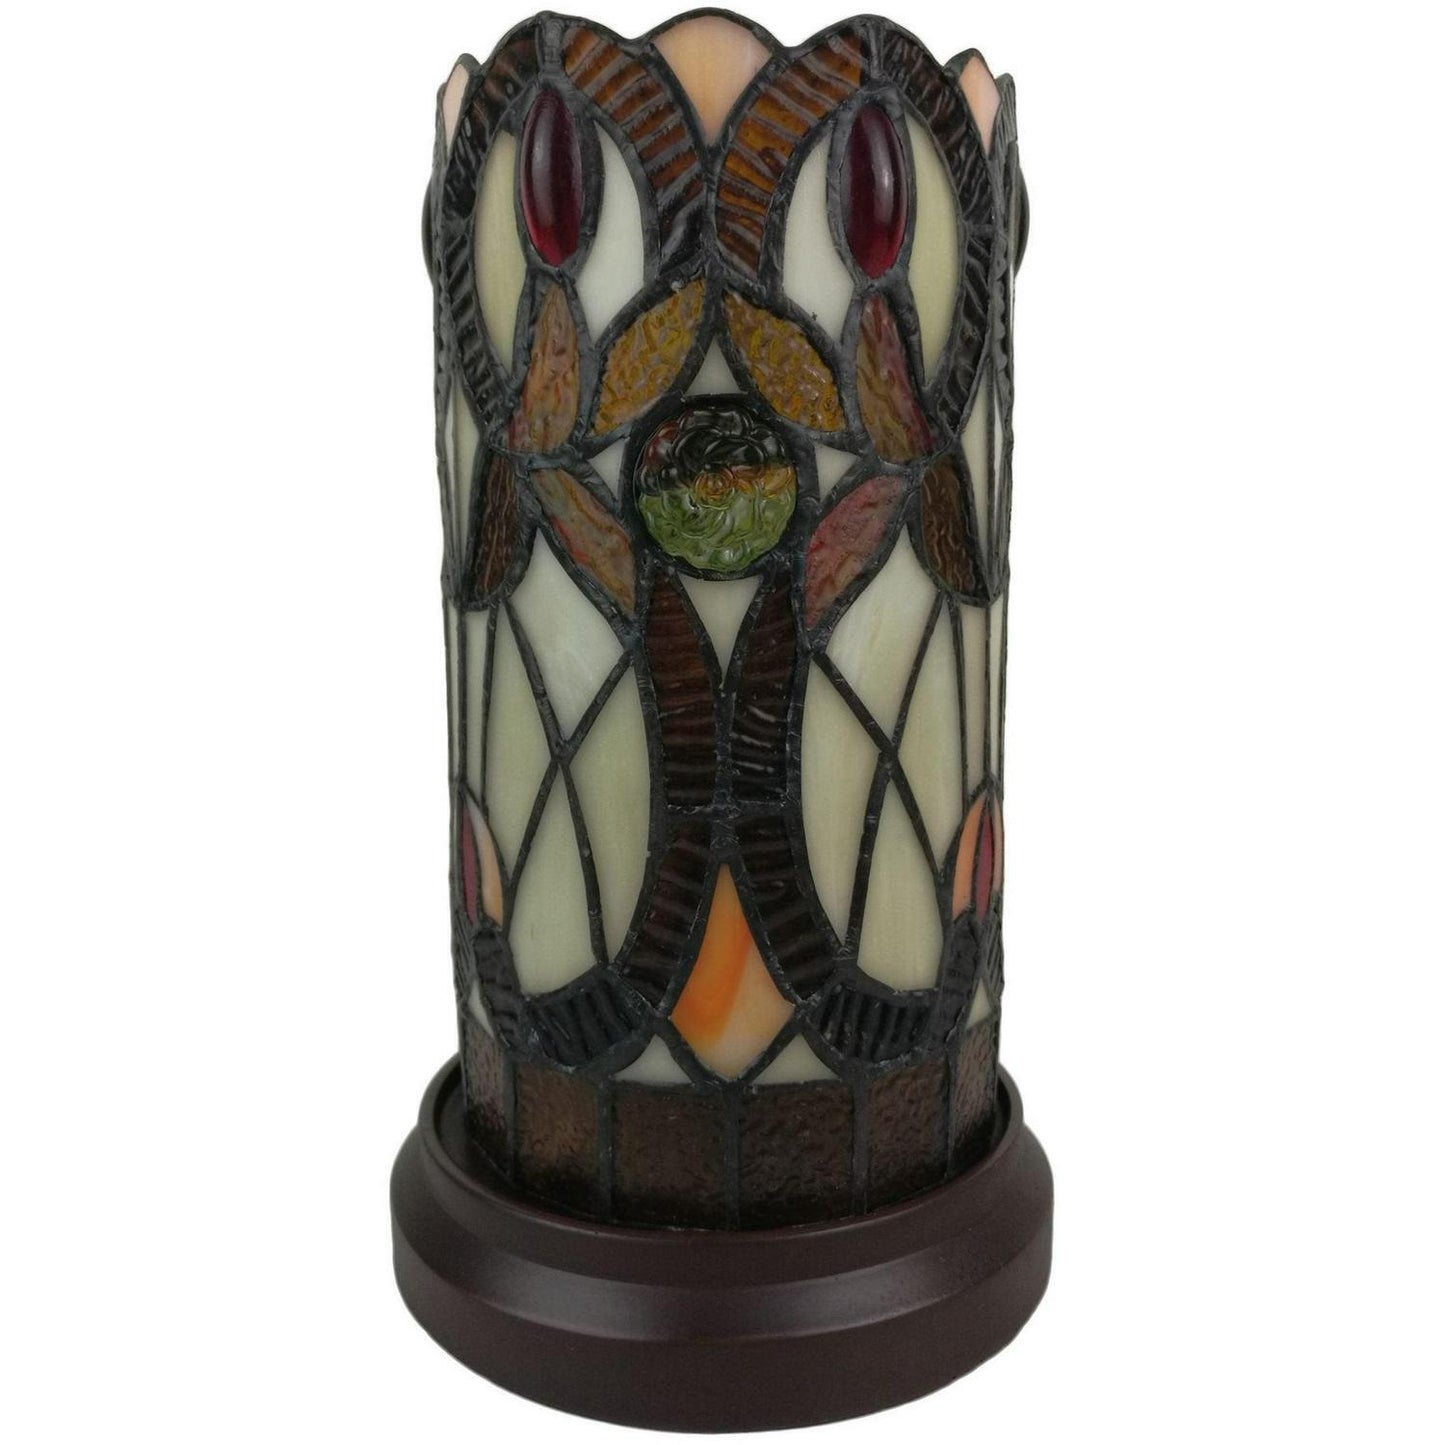 Amber Tiffany Style Stained Glass Hurricane Lamp Table Lamp 10.5in Tall